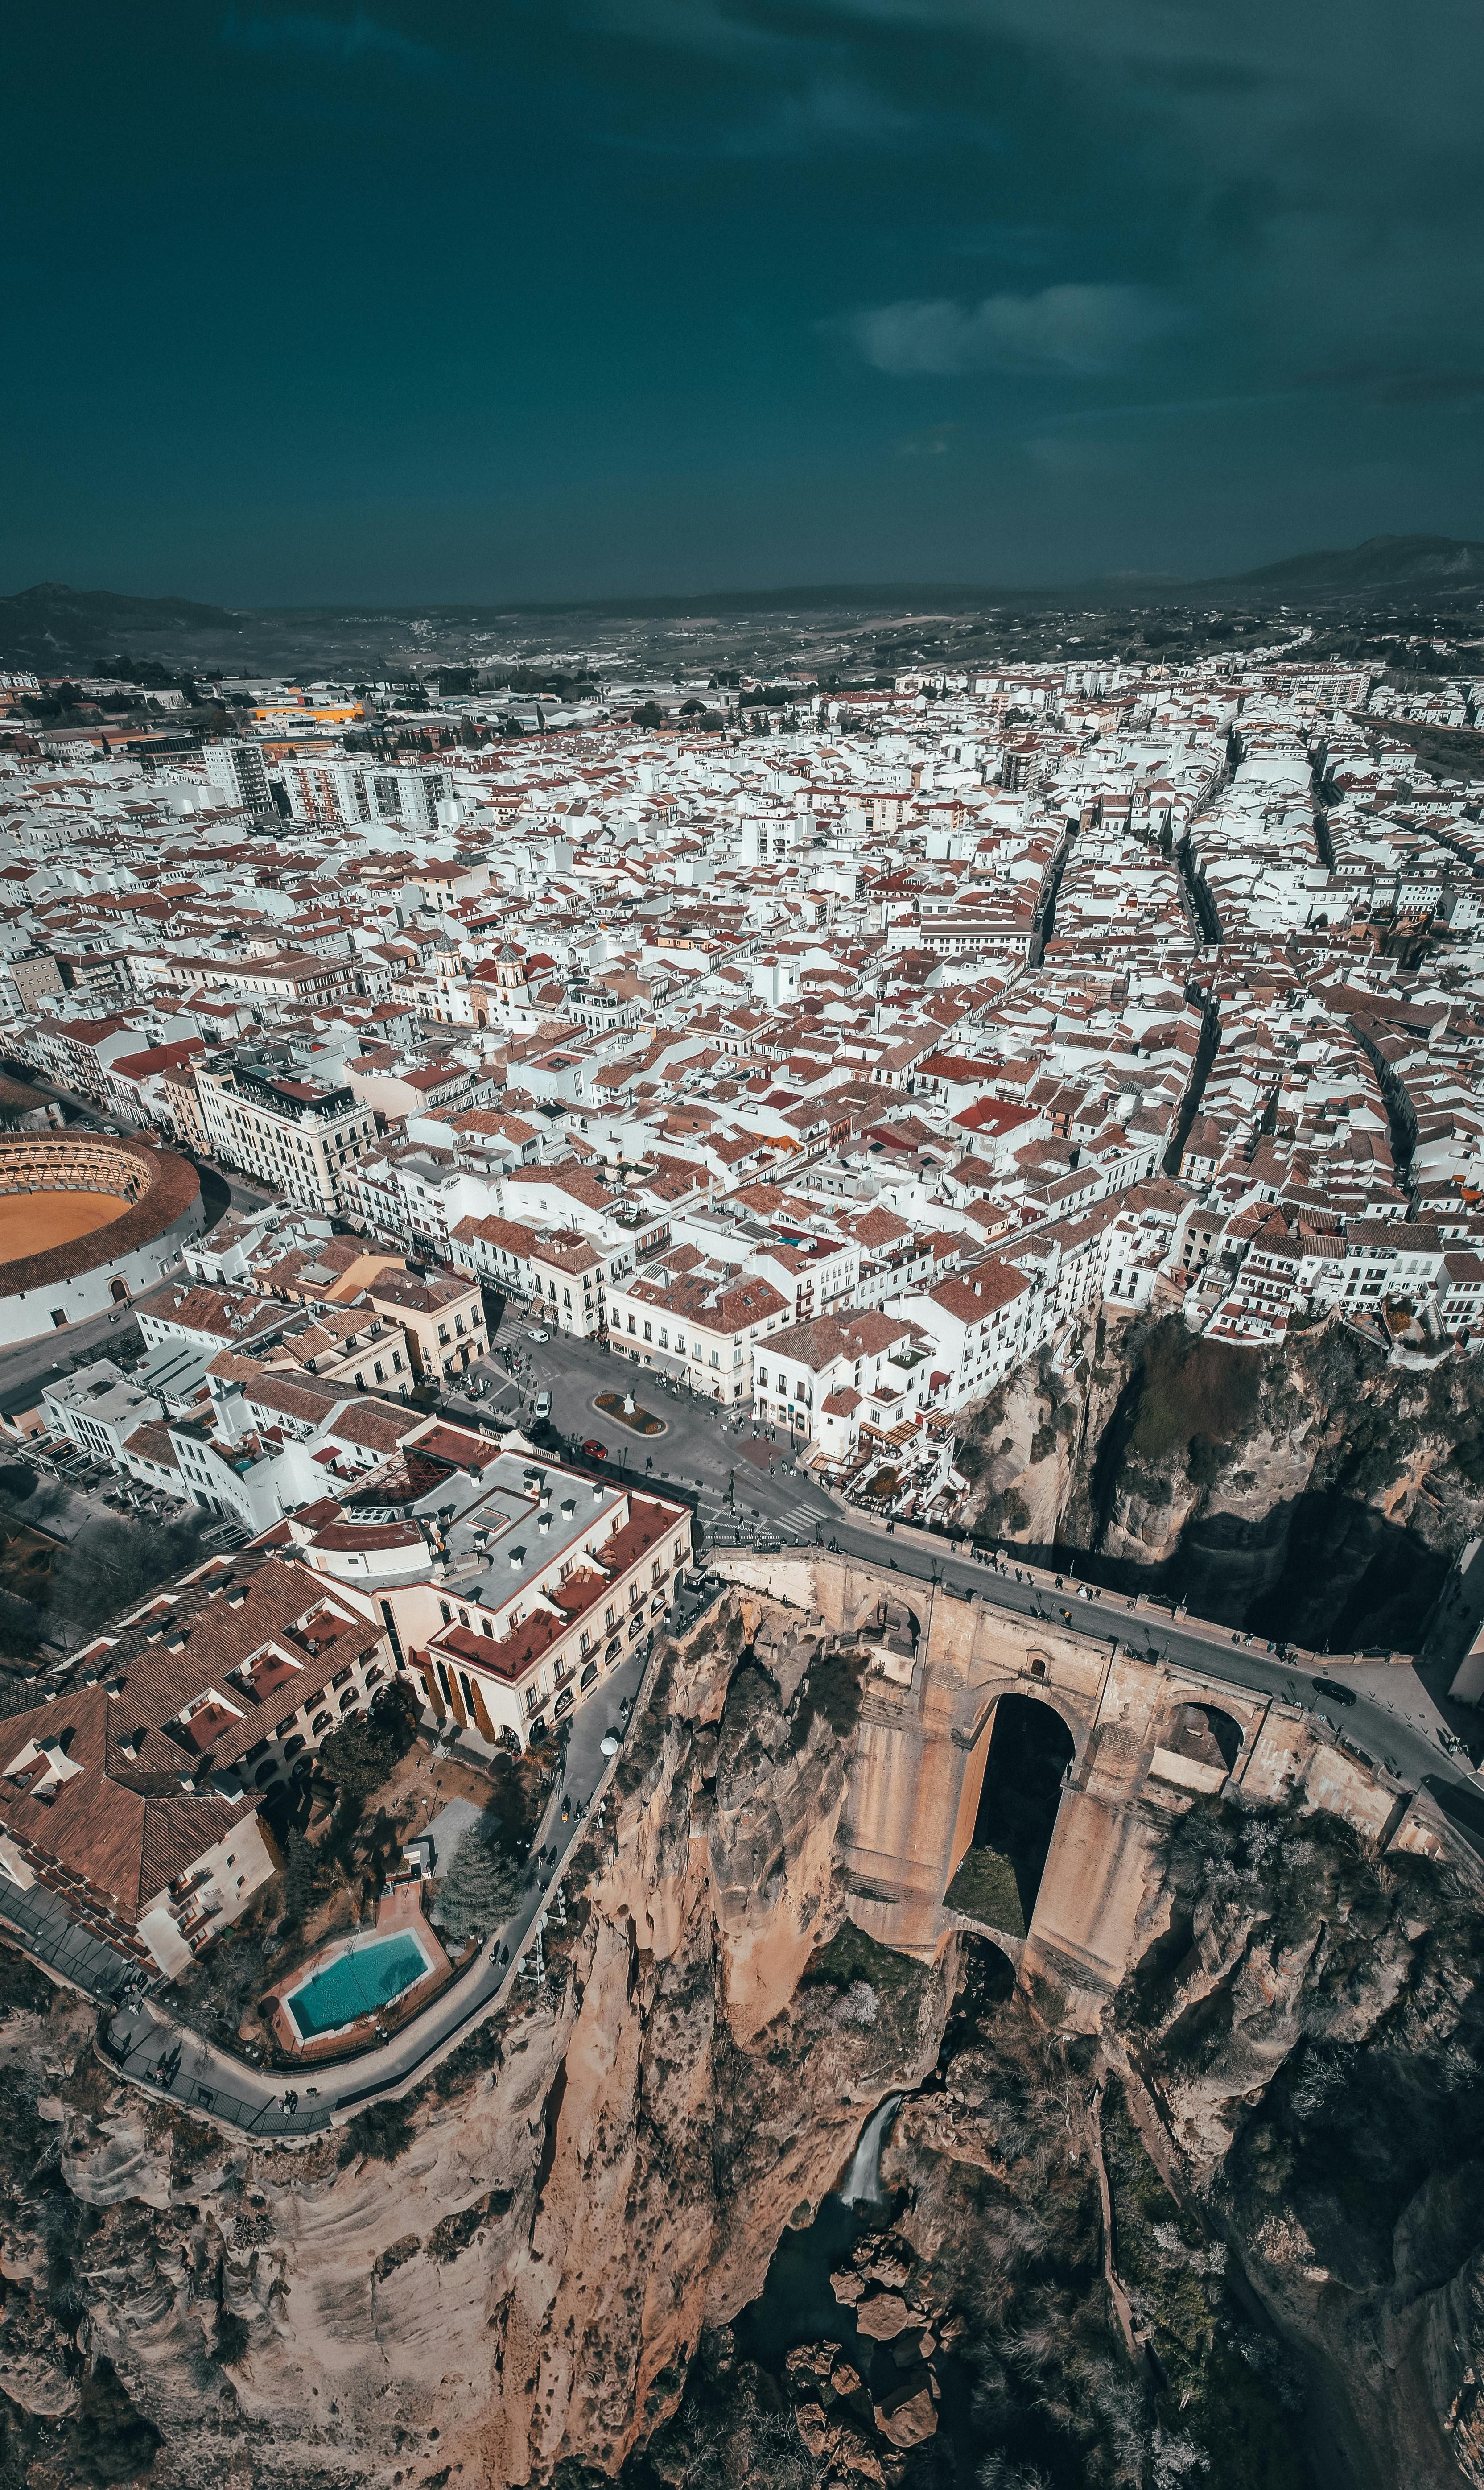 Aerial view of Ronda, Spain with Puente Nuevo and Ronda's Gorge